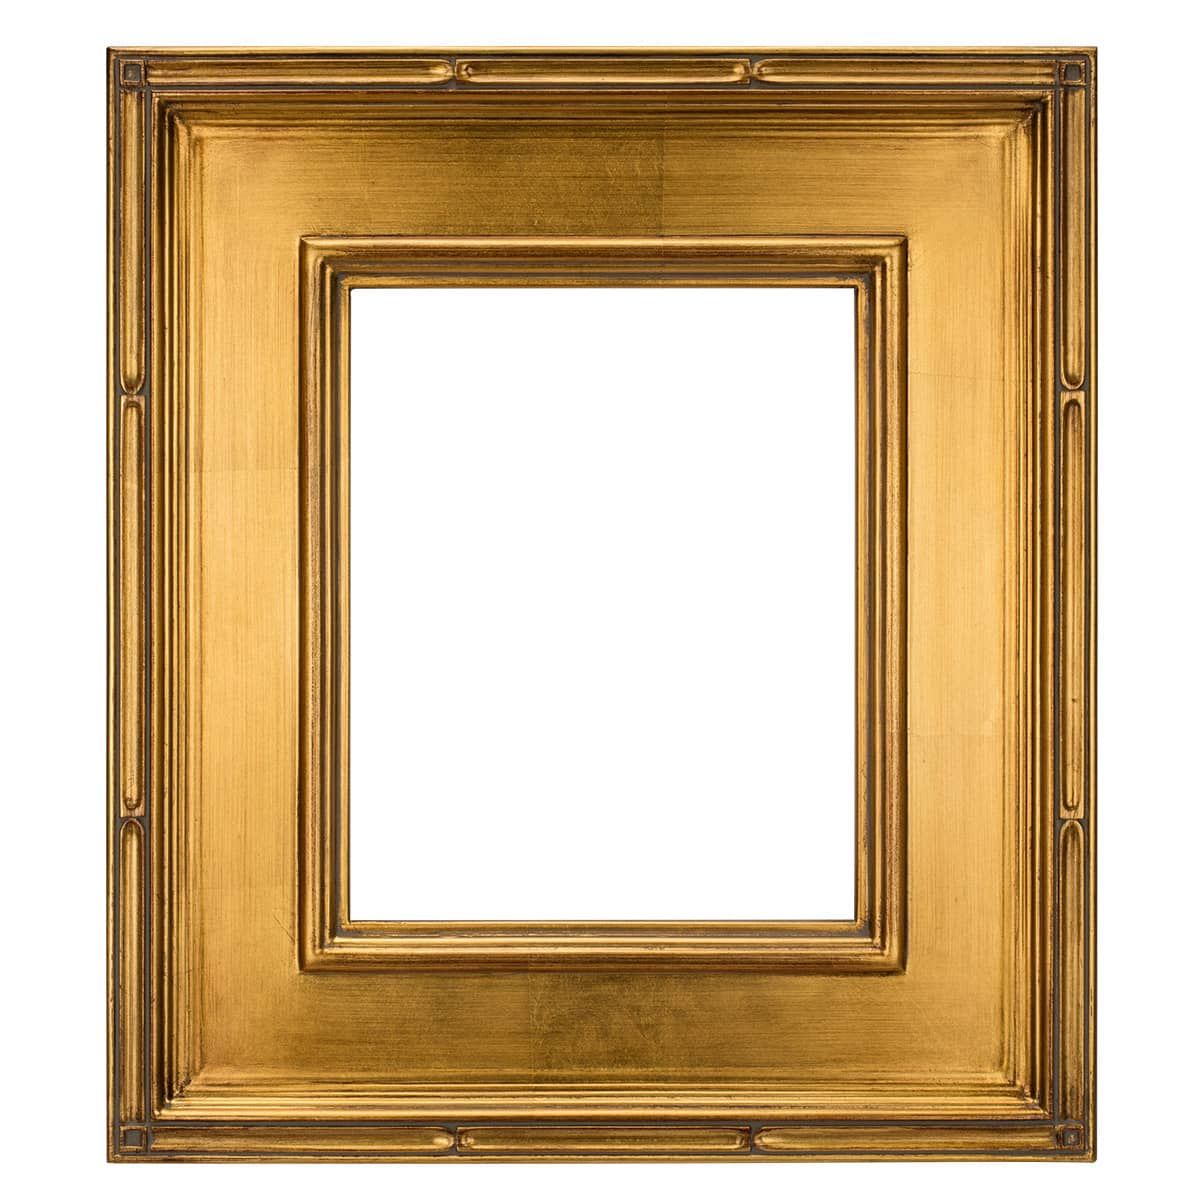 30x40 Bamboo Gold Wood Picture Frame - Complete with Frame Grade Acrylic, Backing, and Hardware